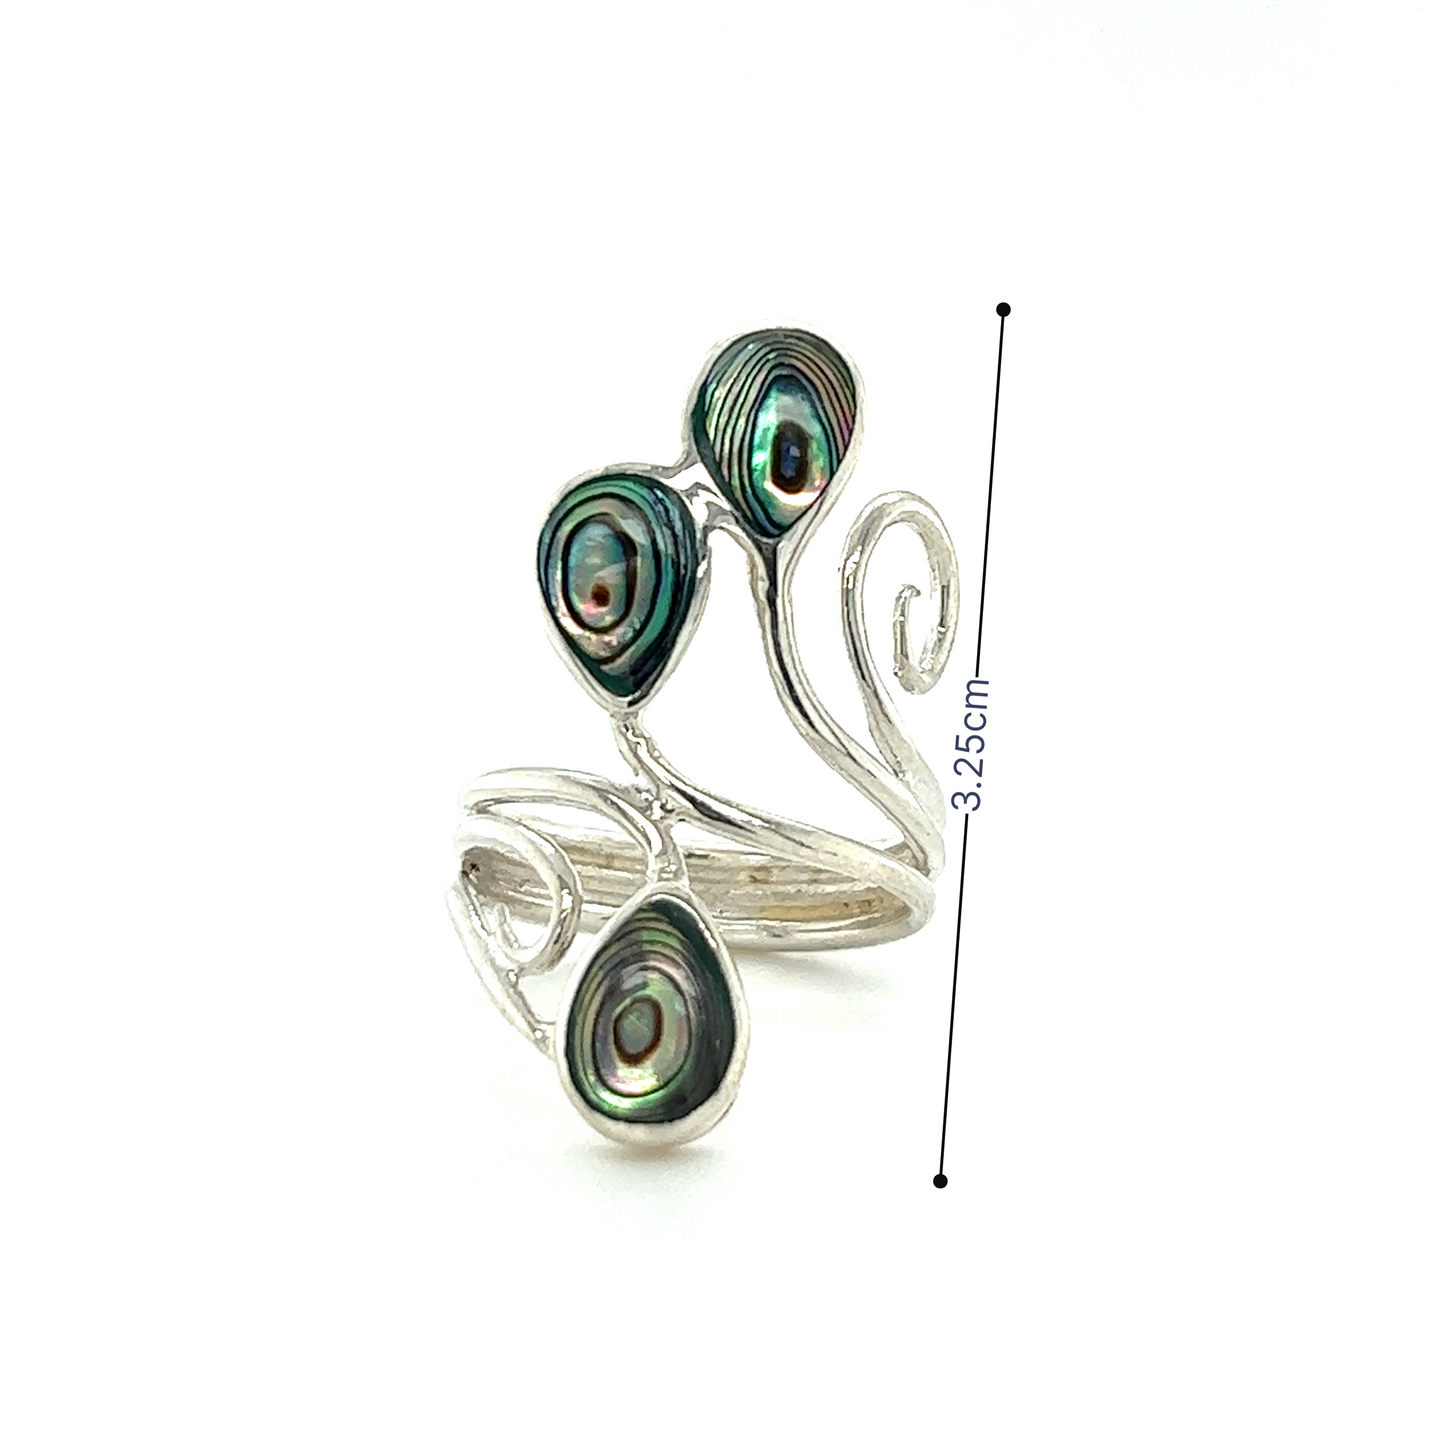 A Super Silver Swirl Freeform Abalone Ring with three abalone shells on it.